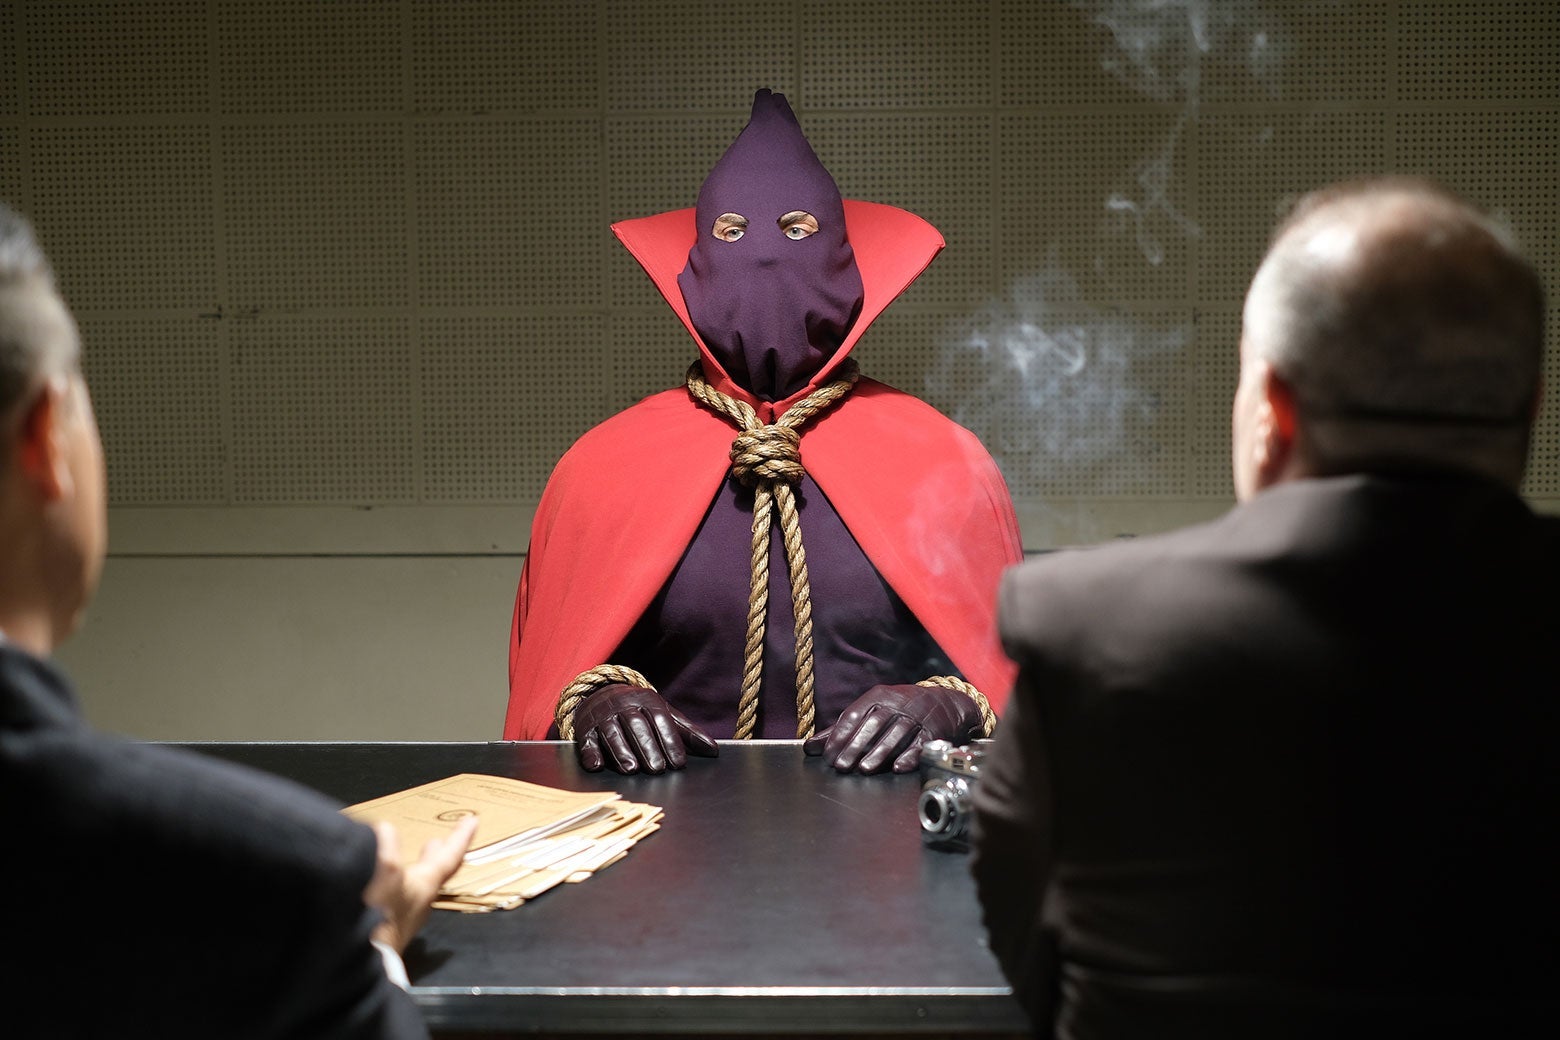 Hooded Justice sits at a table in an interrogation room in this still from HBO's Watchmen.